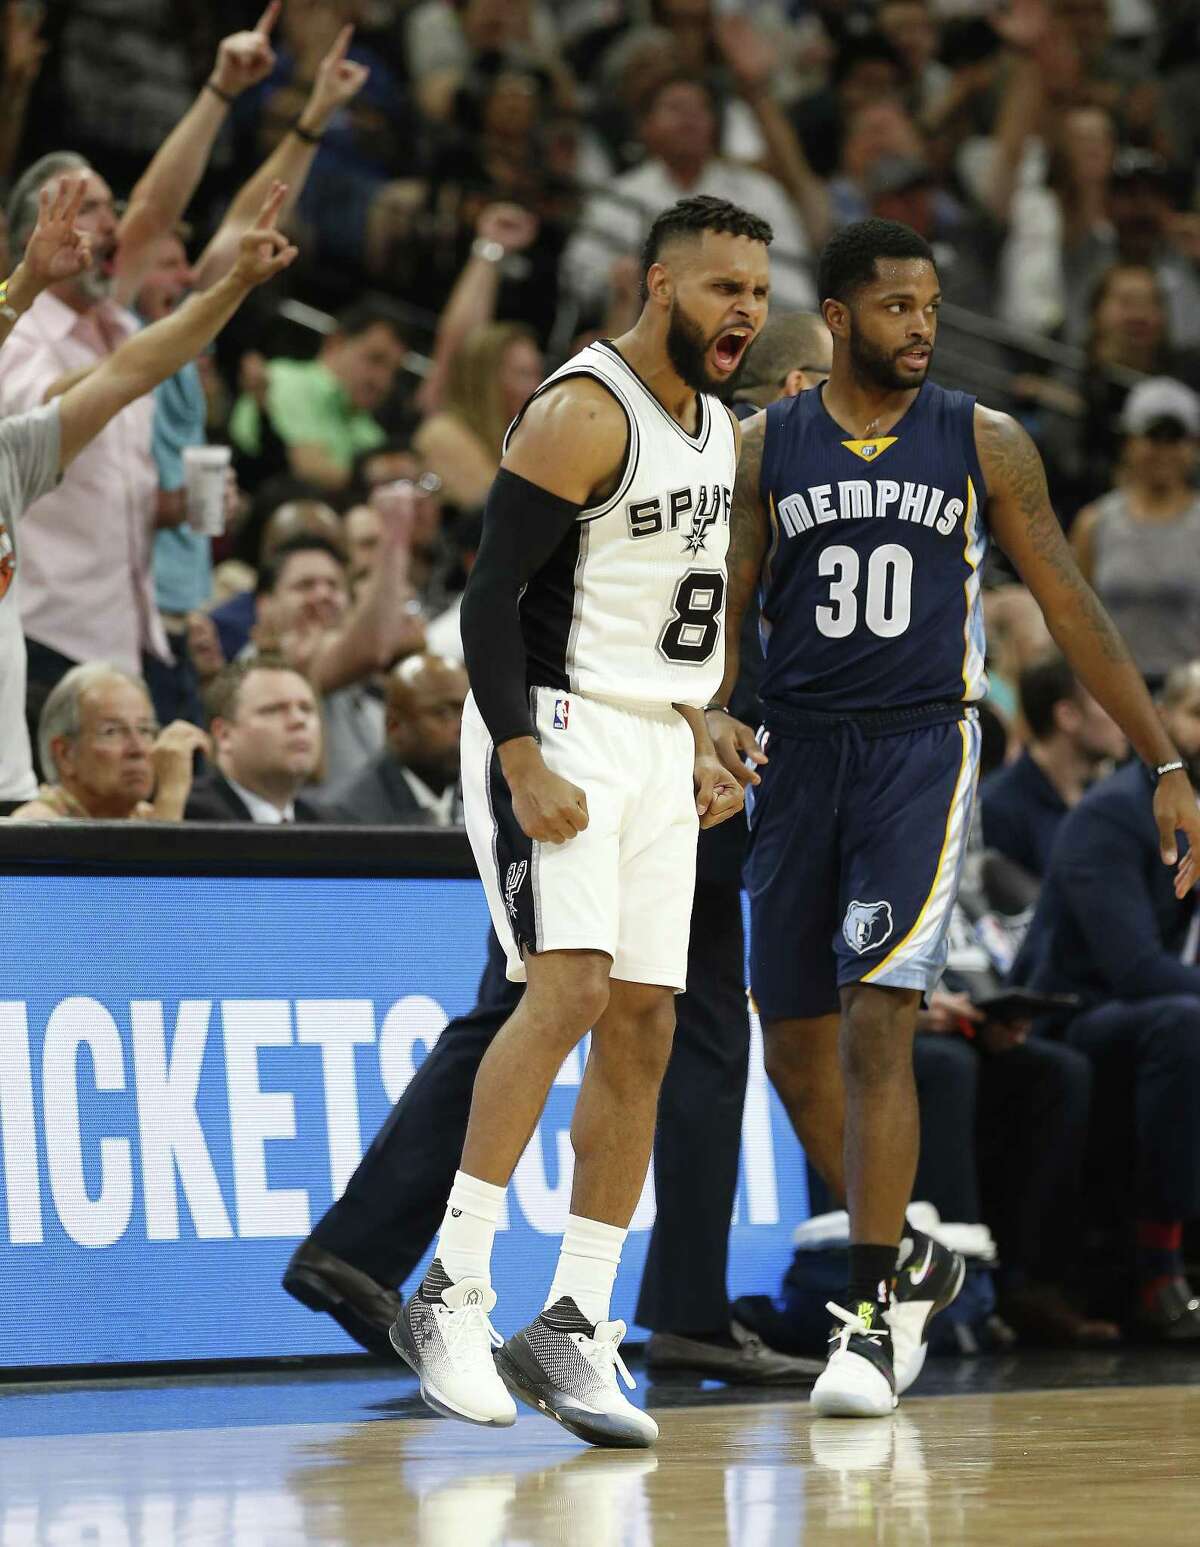 Spurs' Patty Mills (08) reacts after sinking a three-pointer against Memphis Grizzlies' Troy Daniels (30) during Game 5 of the Western Conference playoffs at the AT&T Center on Tuesday, Apr. 25, 2017. Spurs take Game 5, 116-103, over the Grizzlies. (Kin Man Hui/San Antonio Express-News)